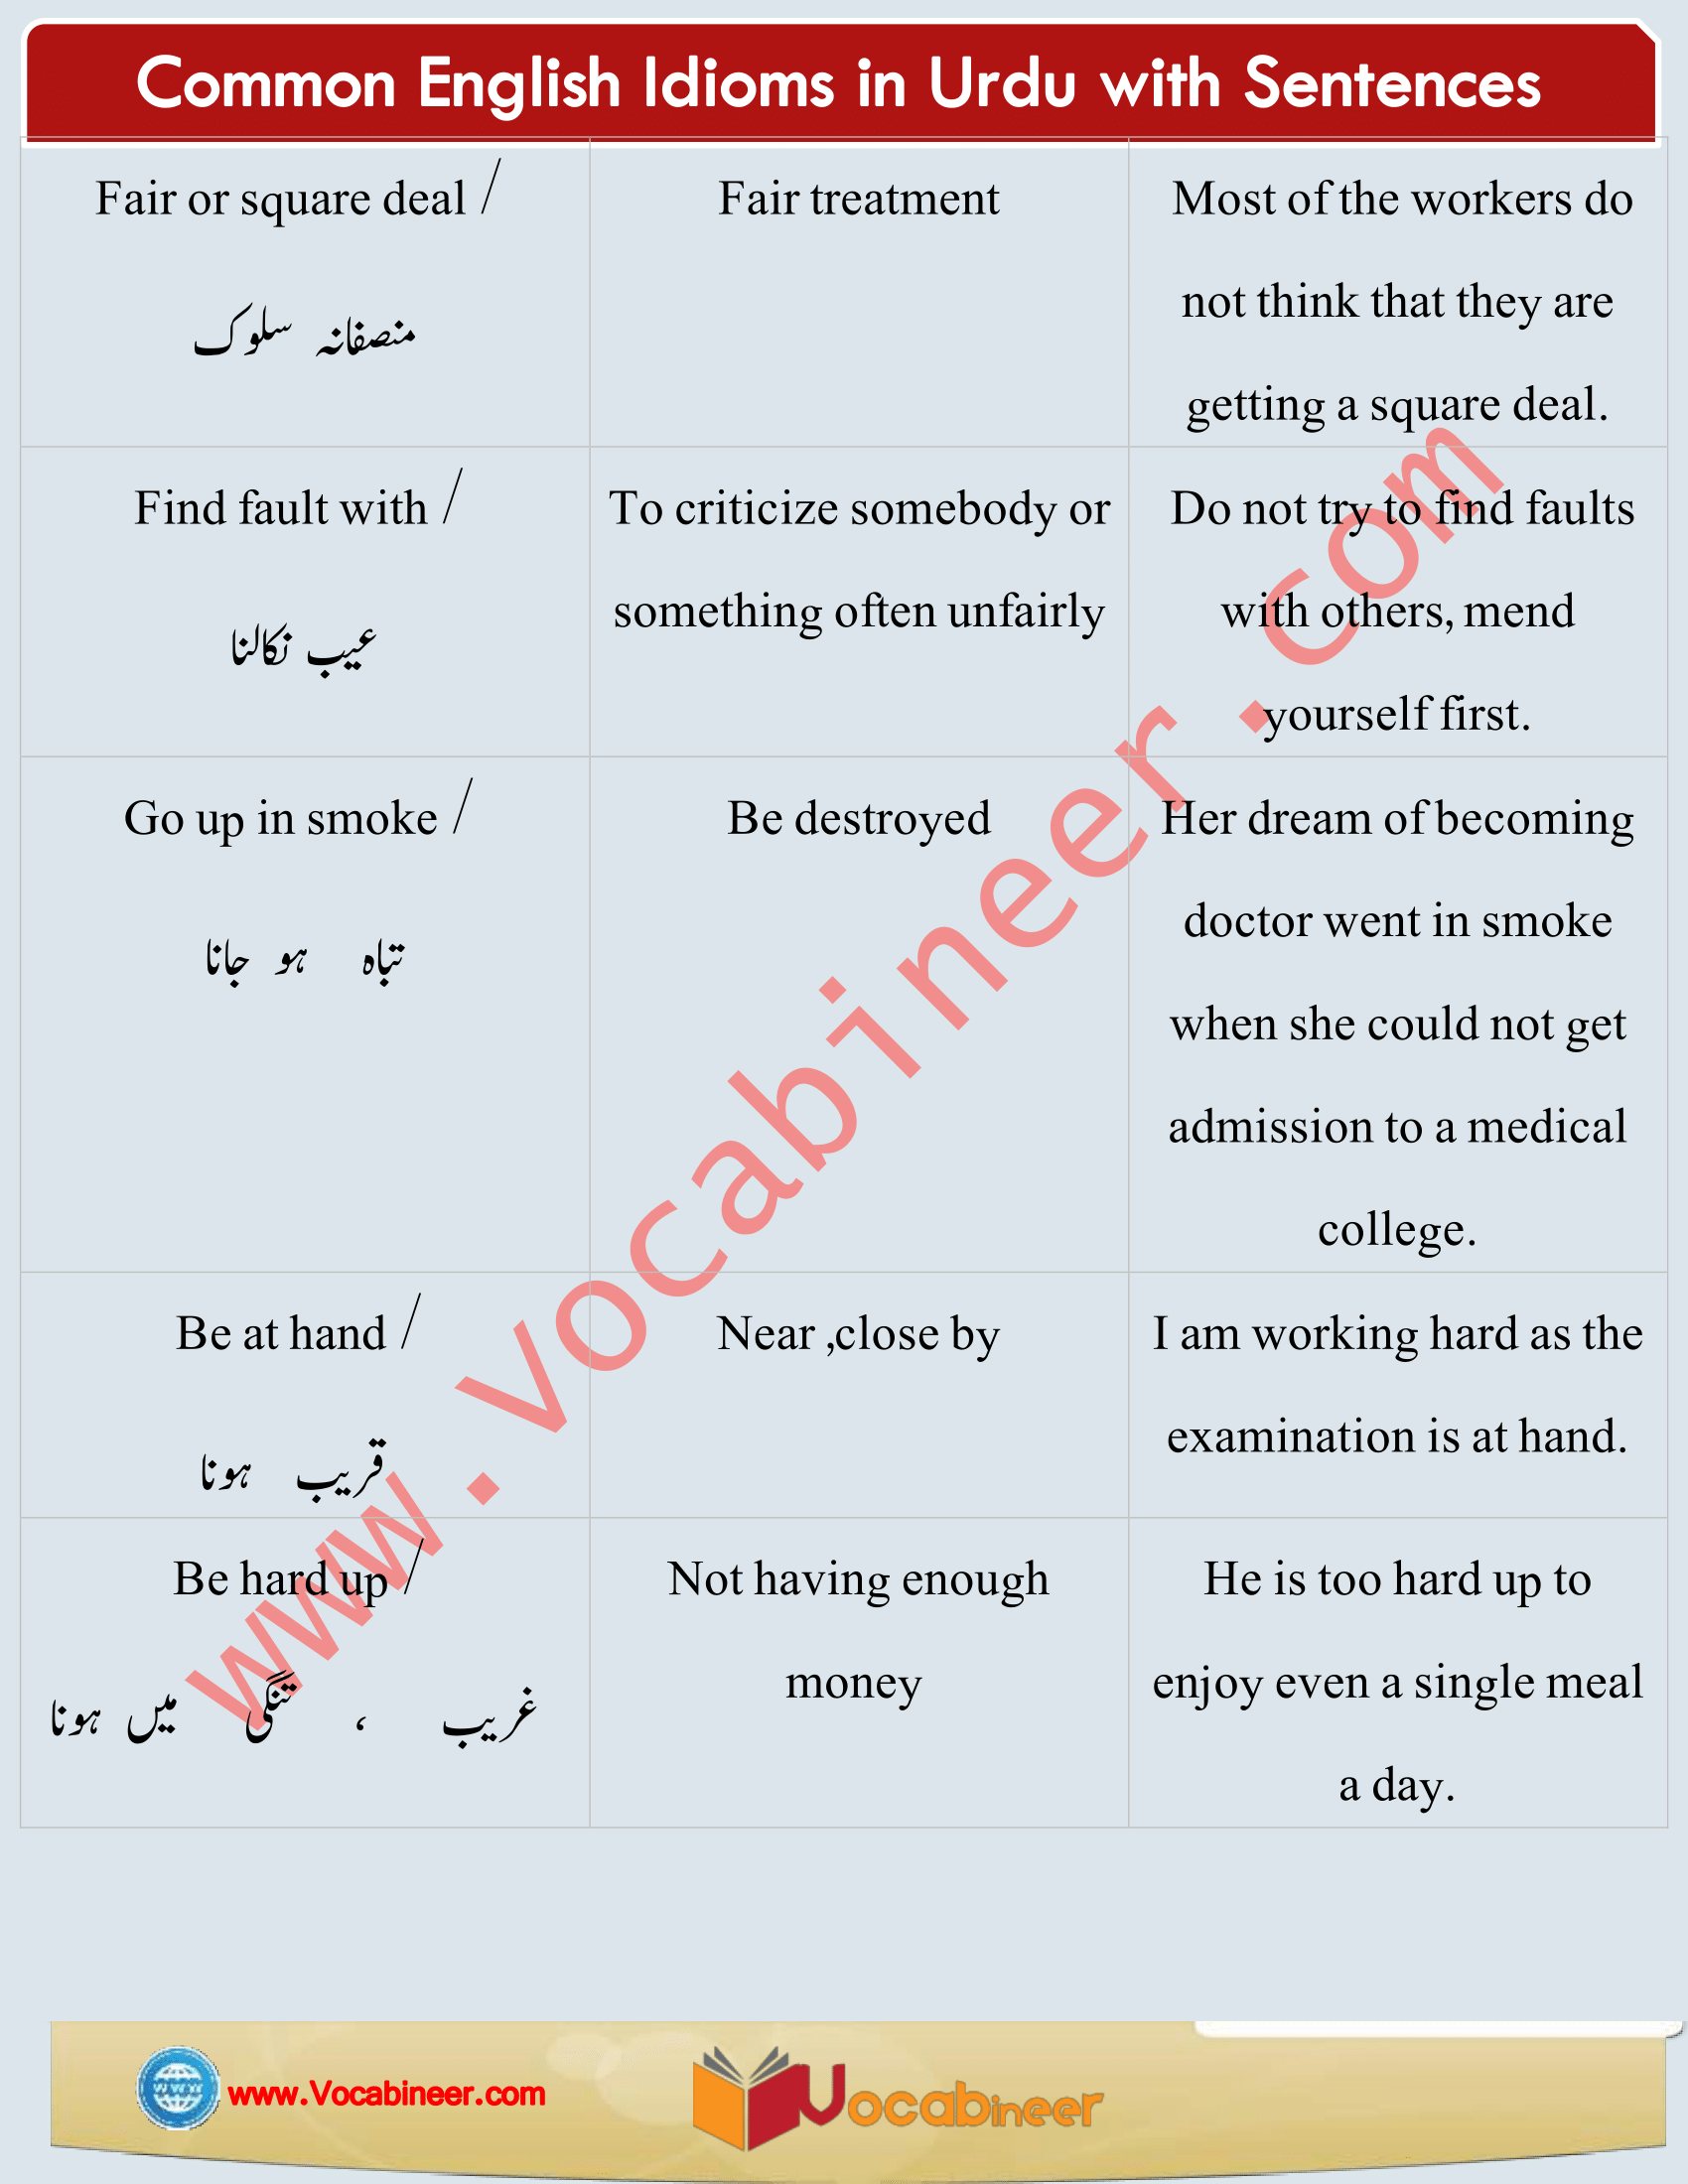 Common English Idioms in Urdu / Hindi, Daily used Idioms with Urdu / Hindi, English Idioms in Urdu, 50 English Idioms in Urdu with sentences, English Idioms we use in daily life, English to Urdu Idioms, Everyday used English Idioms, Most common English Idioms, Daily life English Idioms, 1000 Most common English Idioms, Idioms with sentences, English idioms in Urdu PDF, Download English idioms in PDF, English Idioms with meanings and sentences PDF, Essential Idioms in English PDF, English Idioms in use PDF, American English Idioms with Urdu Hindi meanings, English Idioms with Urdu meanings, Most important English Idioms with sentences, Learn English Idioms through Hindi Urdu, Idioms with Hindi Urdu meanings, Daily used English Idioms with meanings, Spoken English practice, Learn Vocabulary in Urdu.www.vocabineer.com